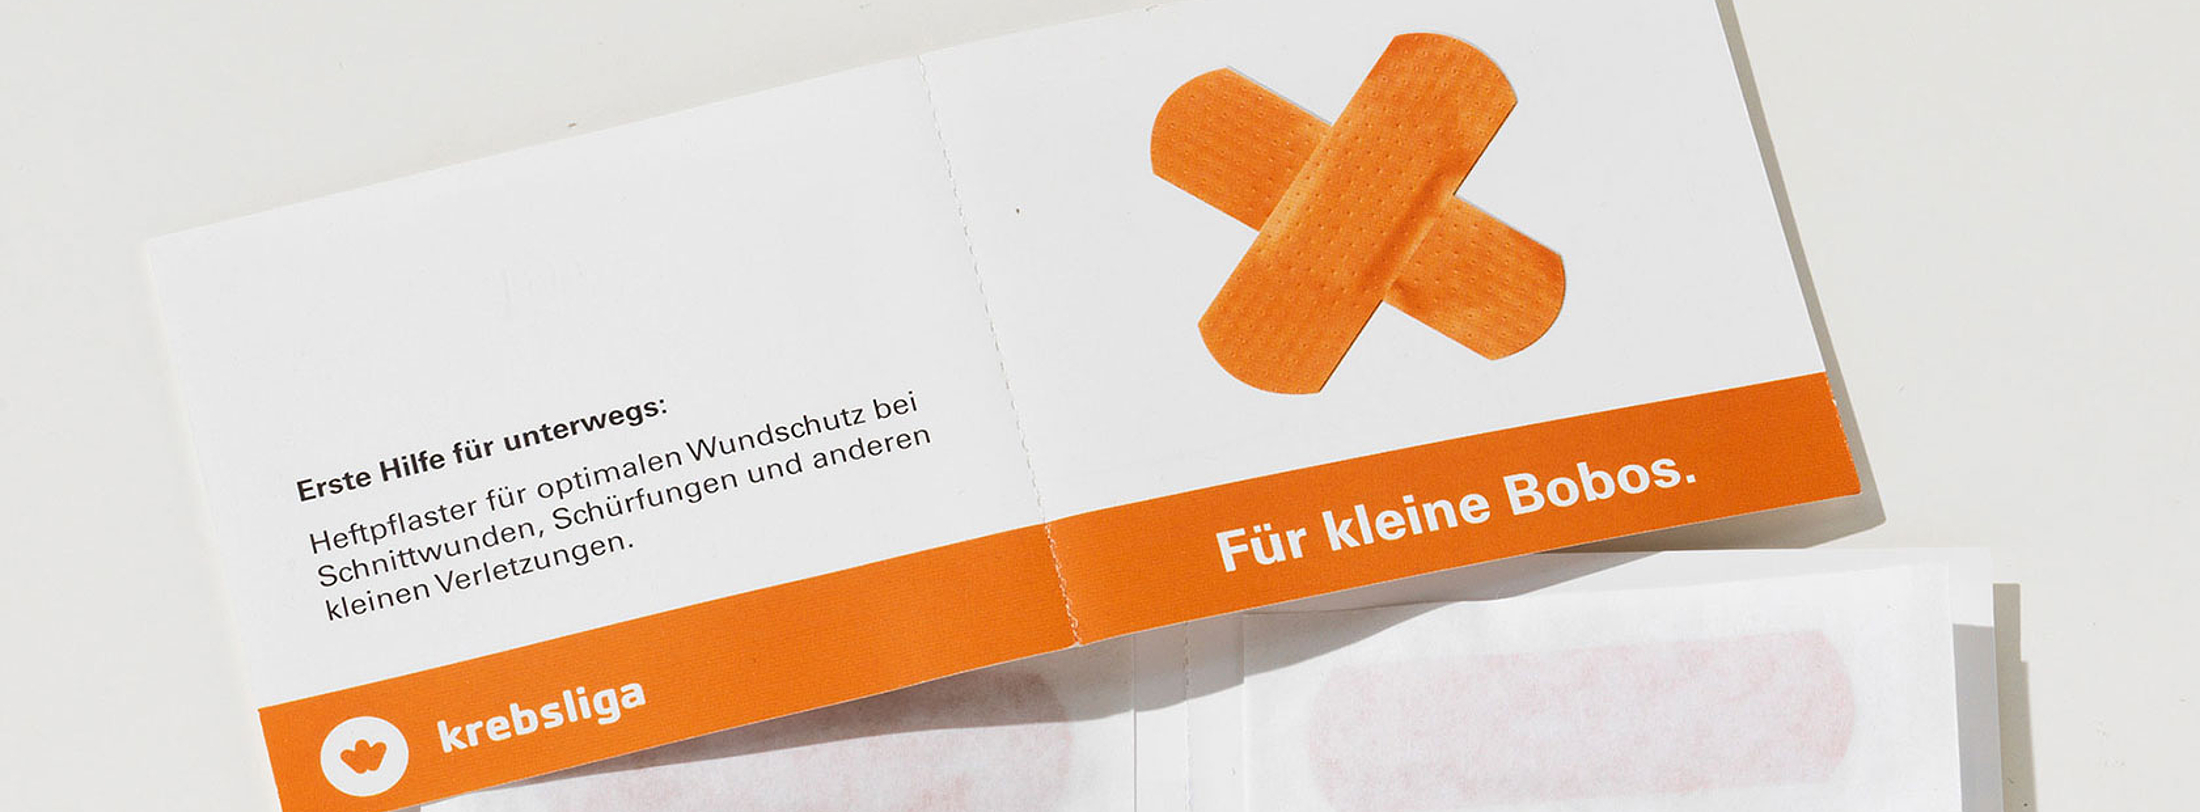 Baumer Dialog Mailings mit Give-aways